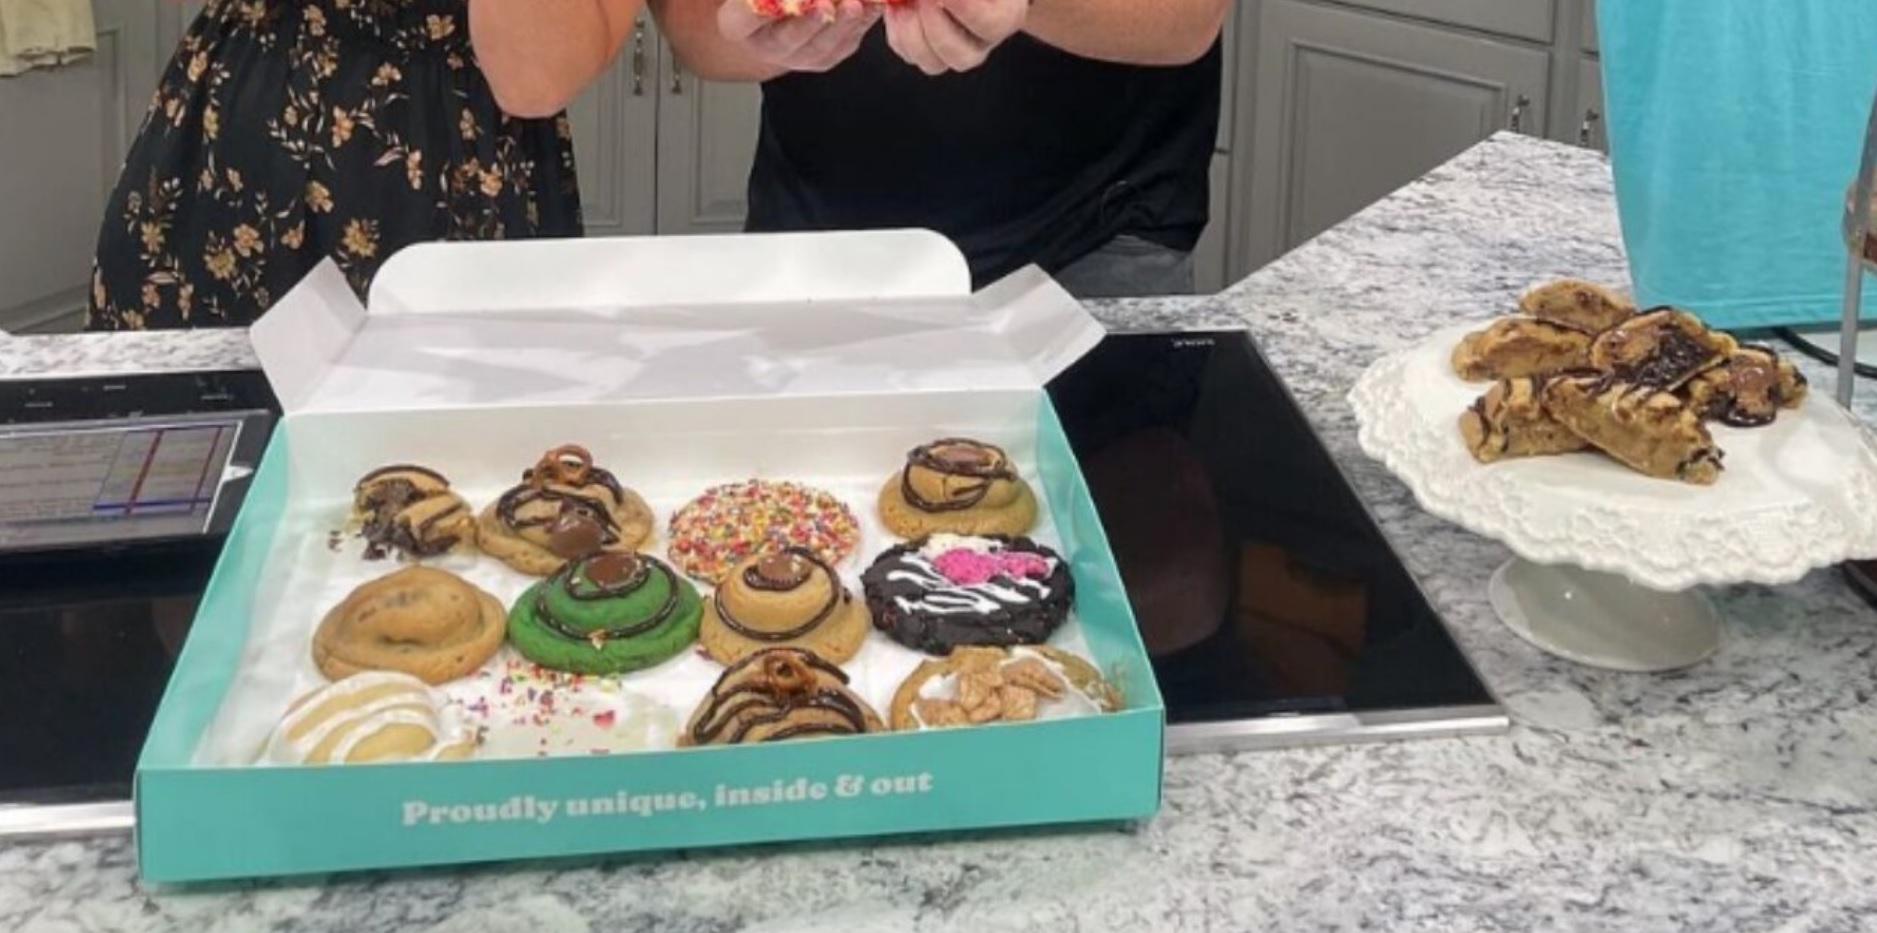 Dirty Dough's messy cookies offer tidy path for returning Missouri man